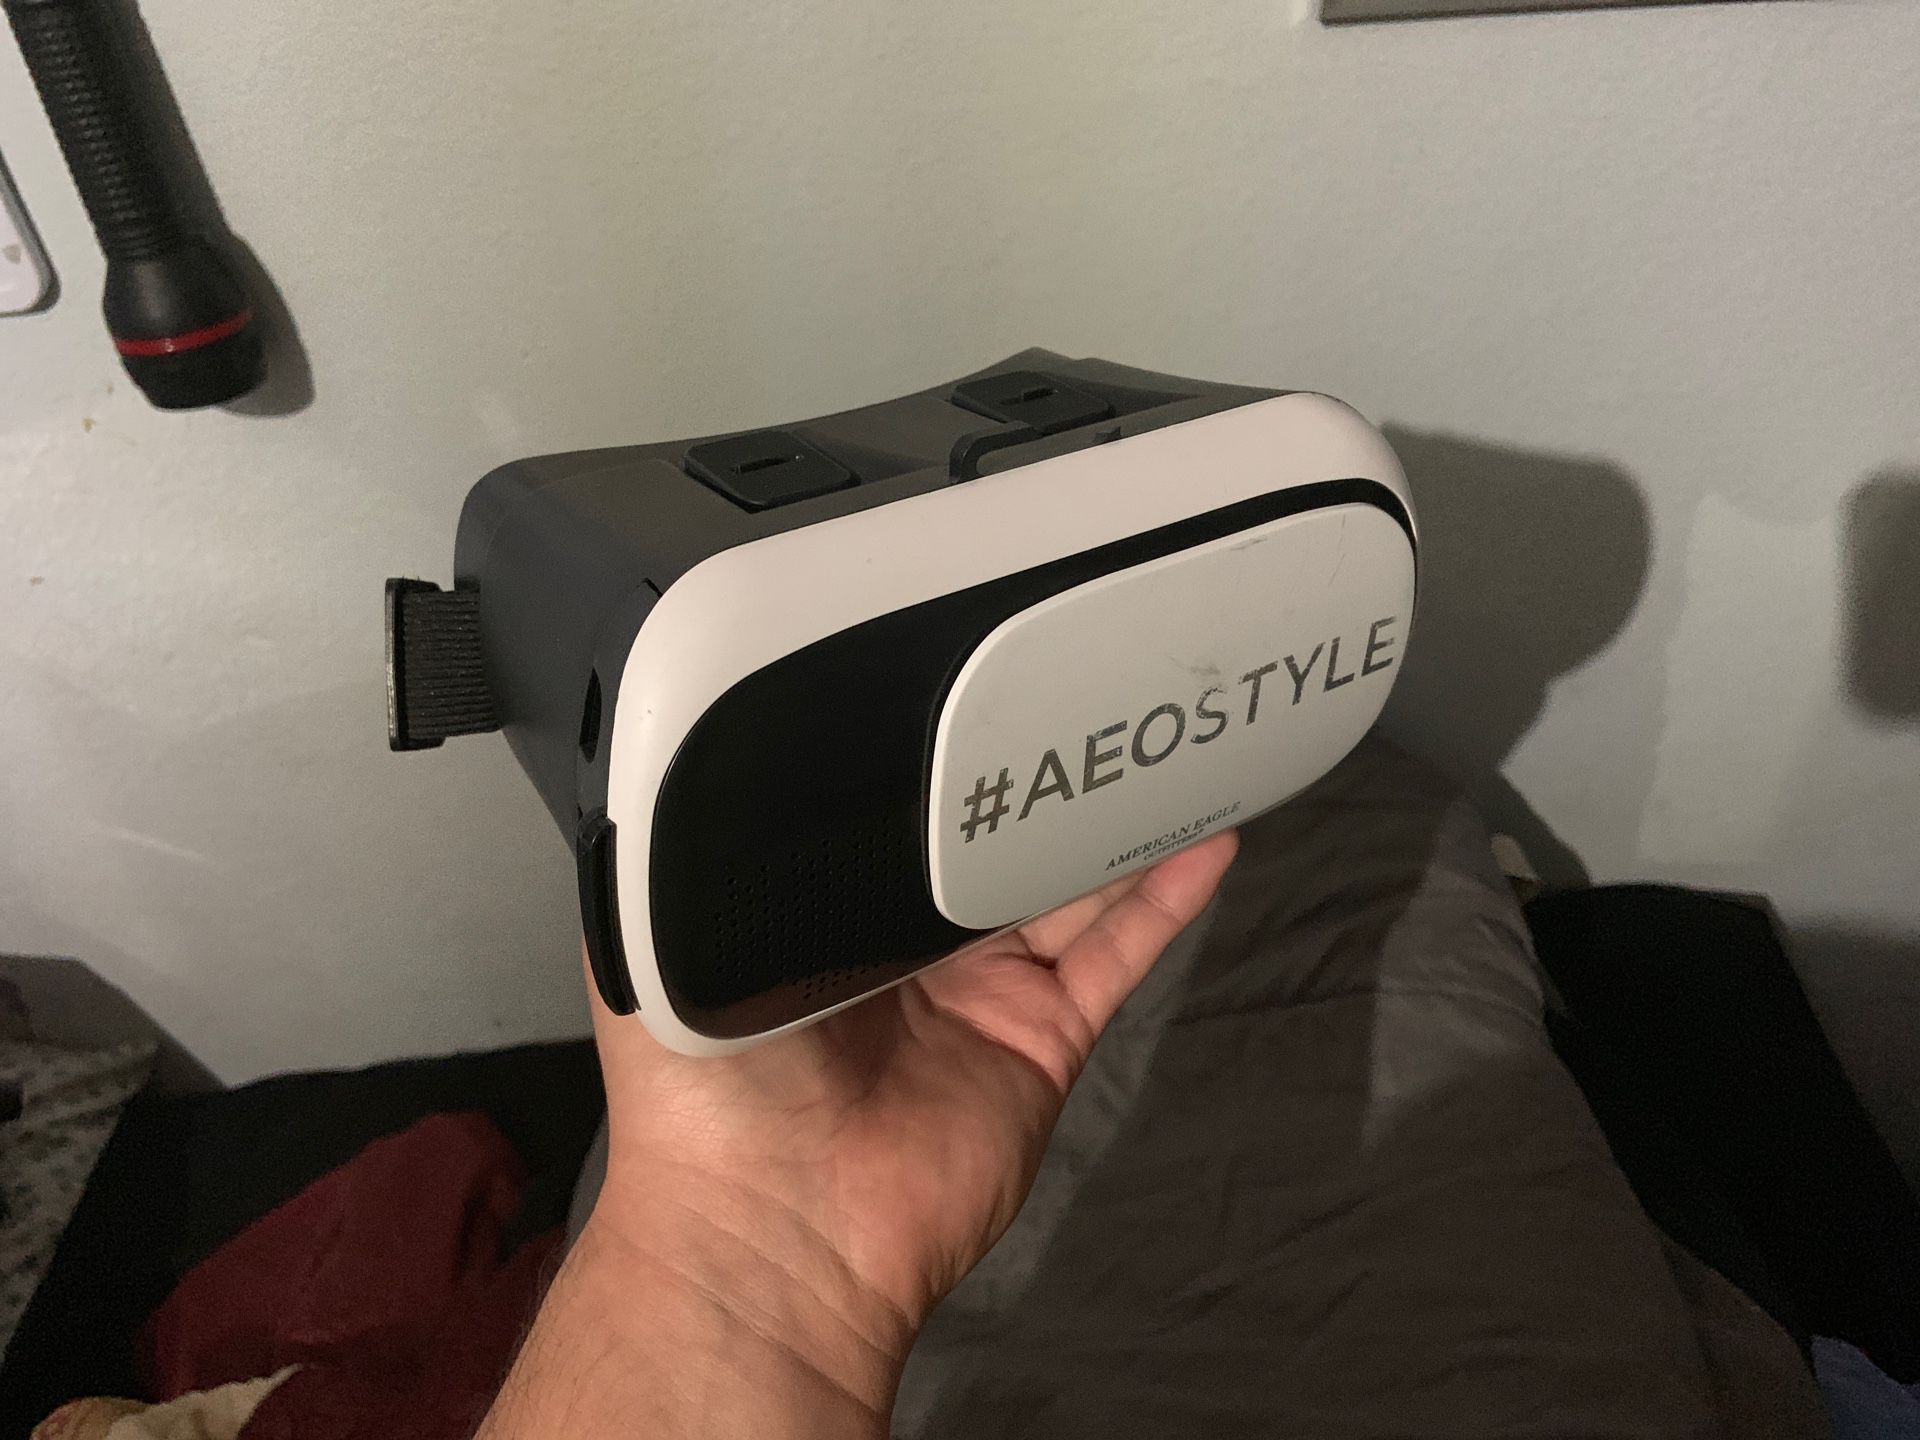 Phone vr headset I’m not sure of brand but works very well.